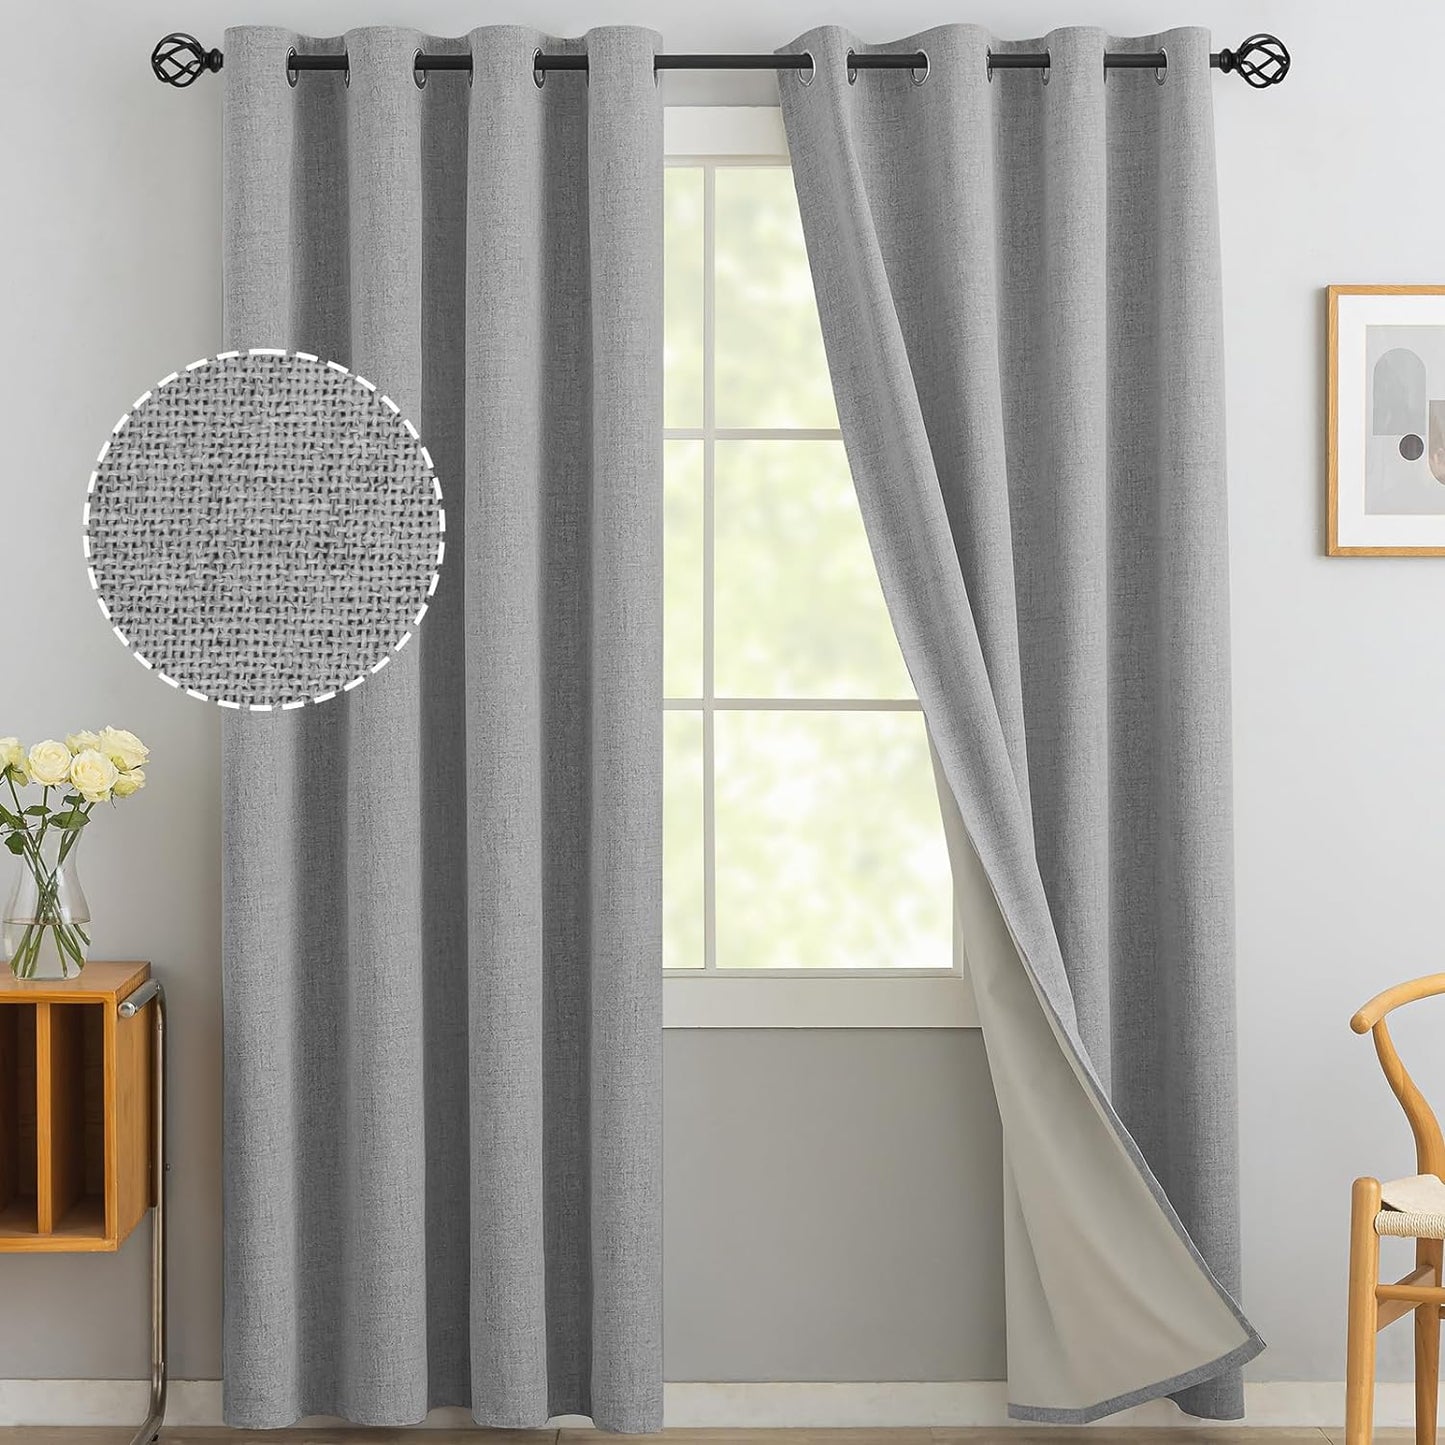 Yakamok Natural Linen Curtains 100% Blackout 84 Inches Long,Room Darkening Textured Curtains for Living Room Thermal Grommet Bedroom Curtains 2 Panels with Greyish White Liner  Yakamok Dove Grey 52W X 90L / 2 Panels 